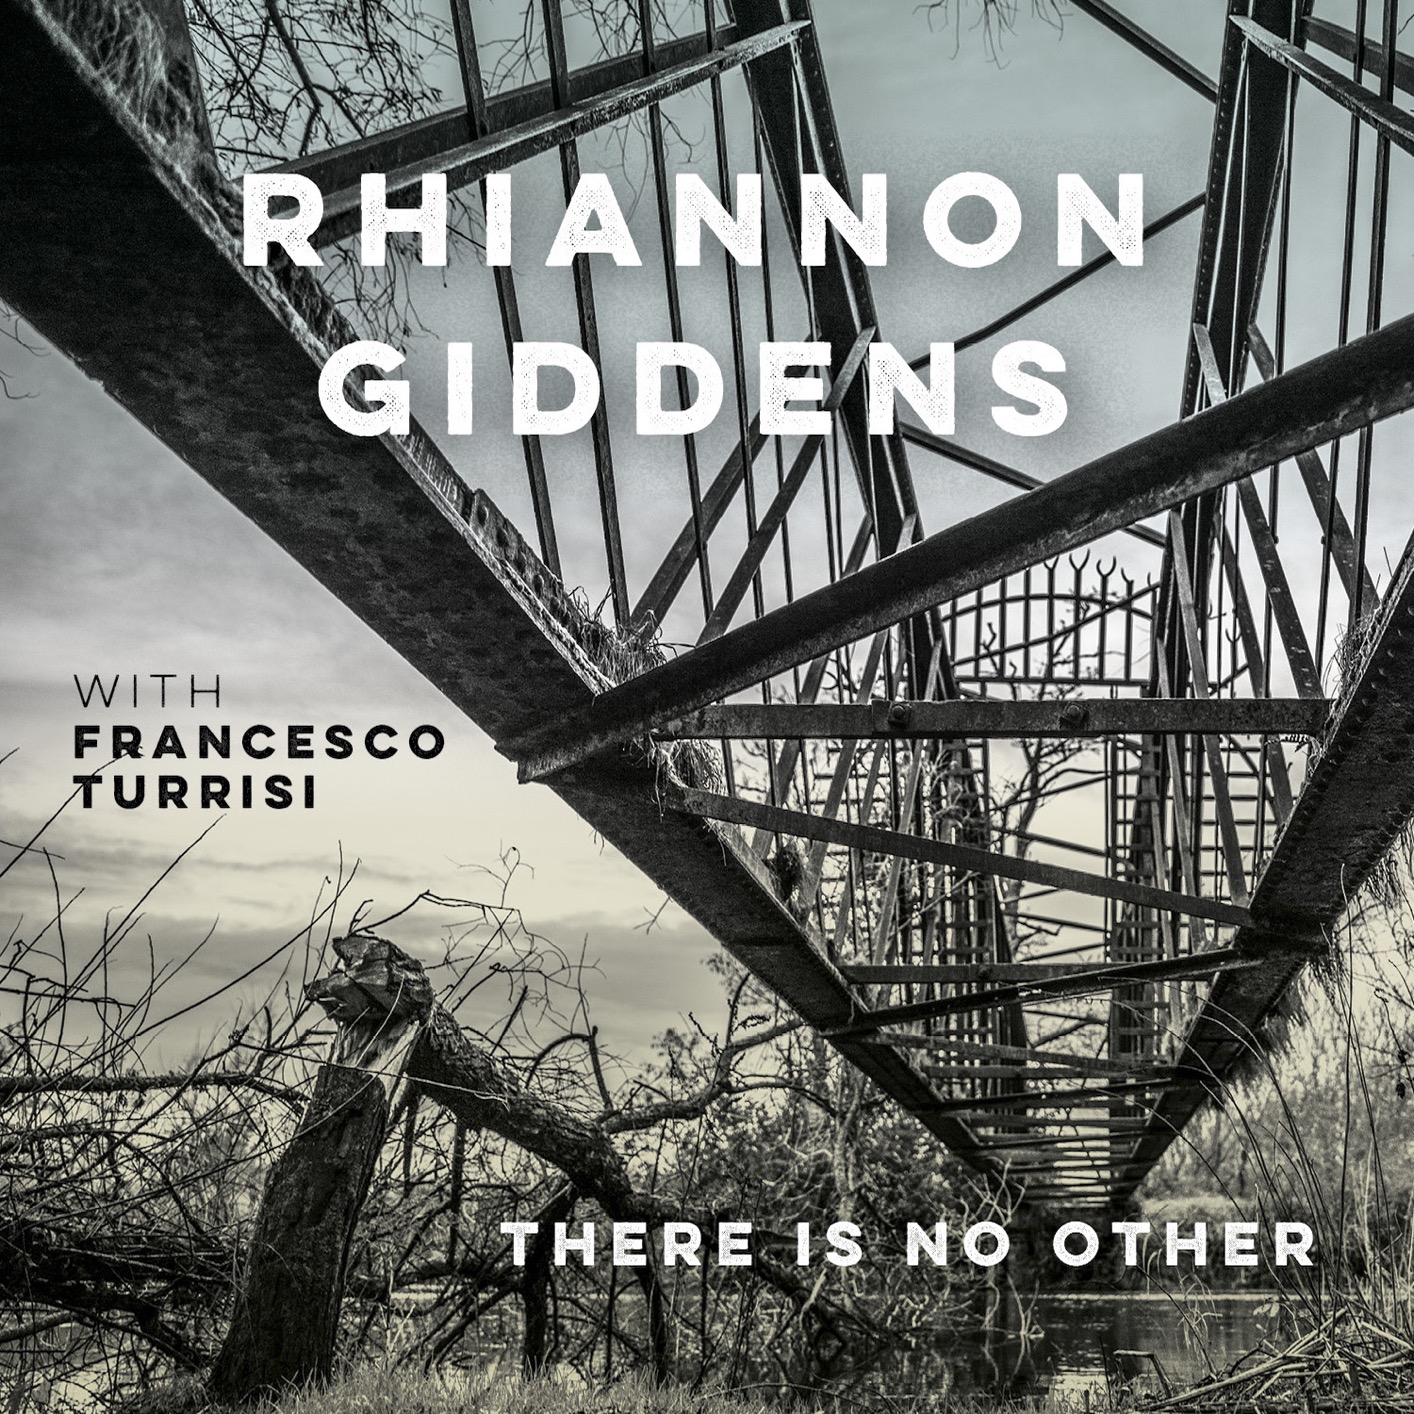 Rhiannon Giddens - There is no Other (Deluxe Version) (2019) [FLAC 24bit/96kHz]